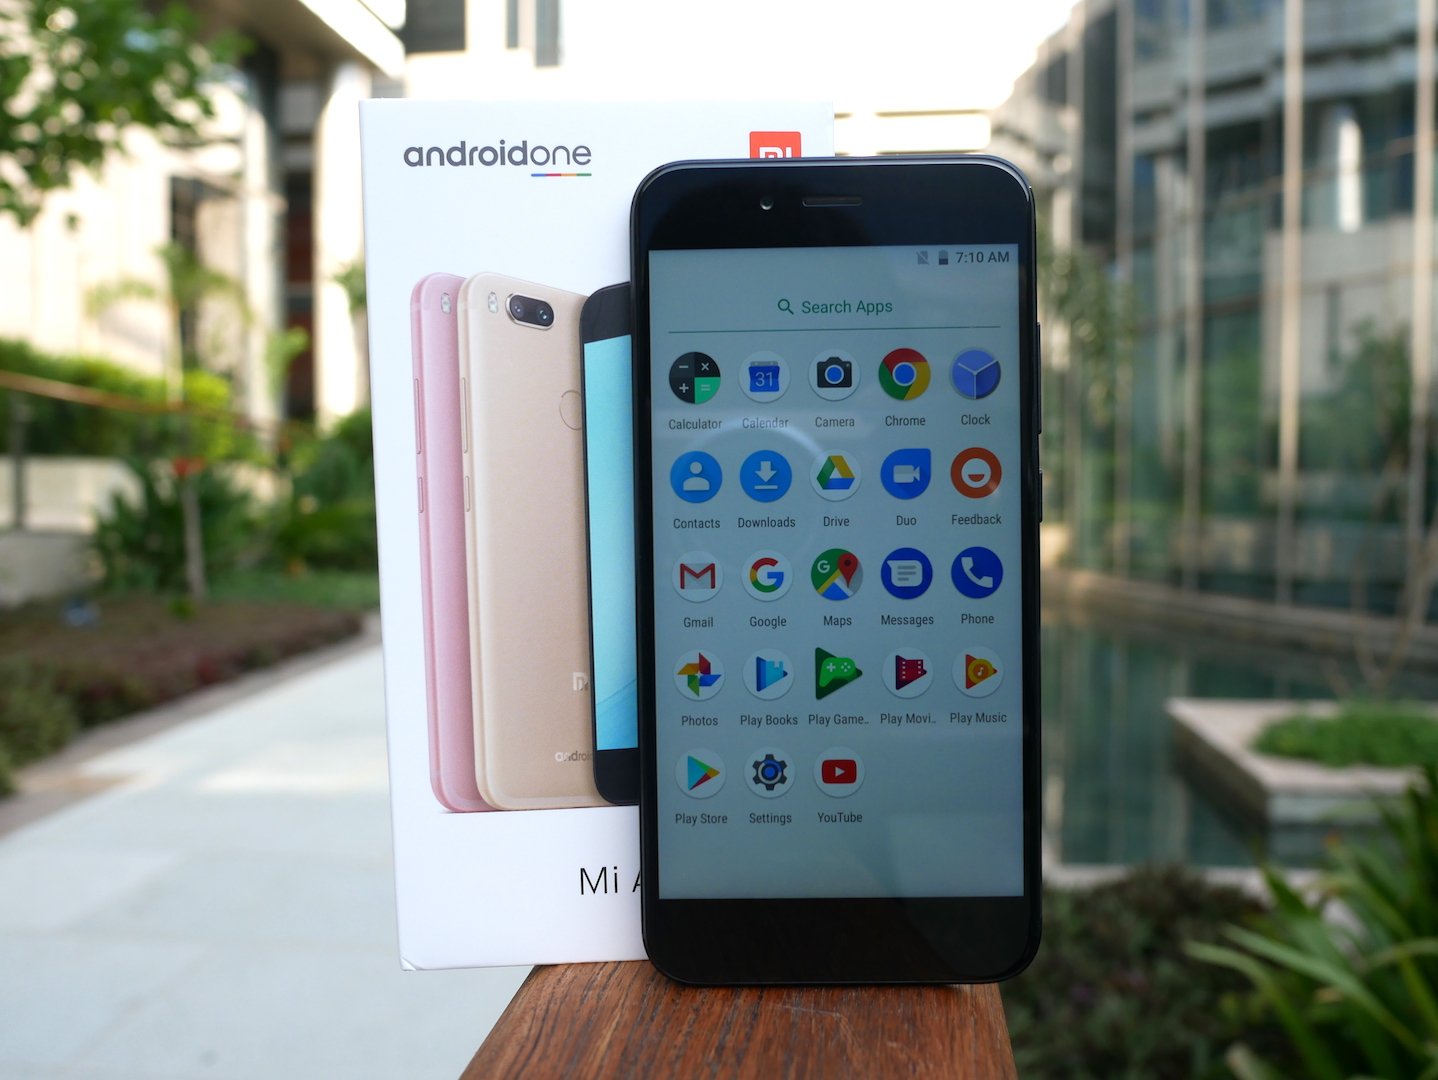 Mi android one. Xiaomi на Android 1. Android one Redmi a1.